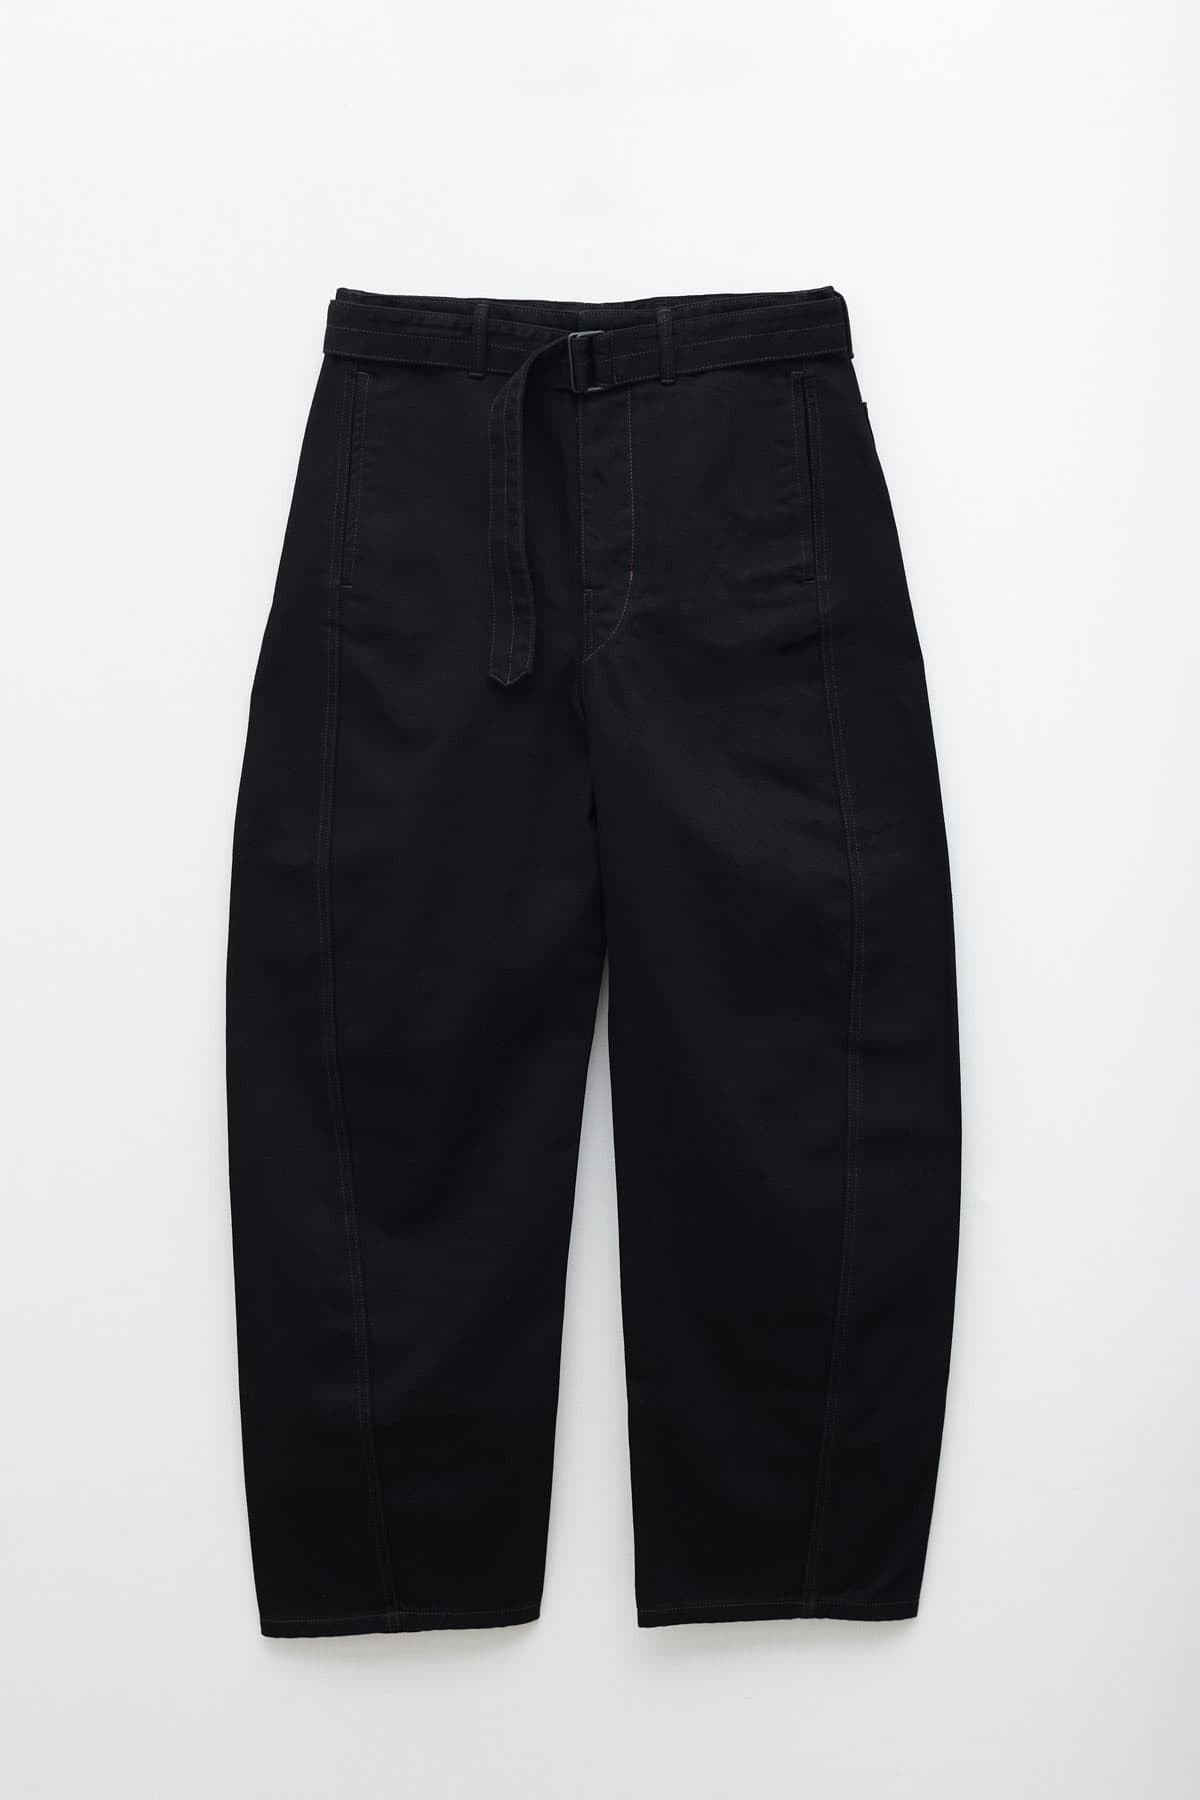 LEMAIRE BLACK TWISTED BELTED PANTS IAMNUE